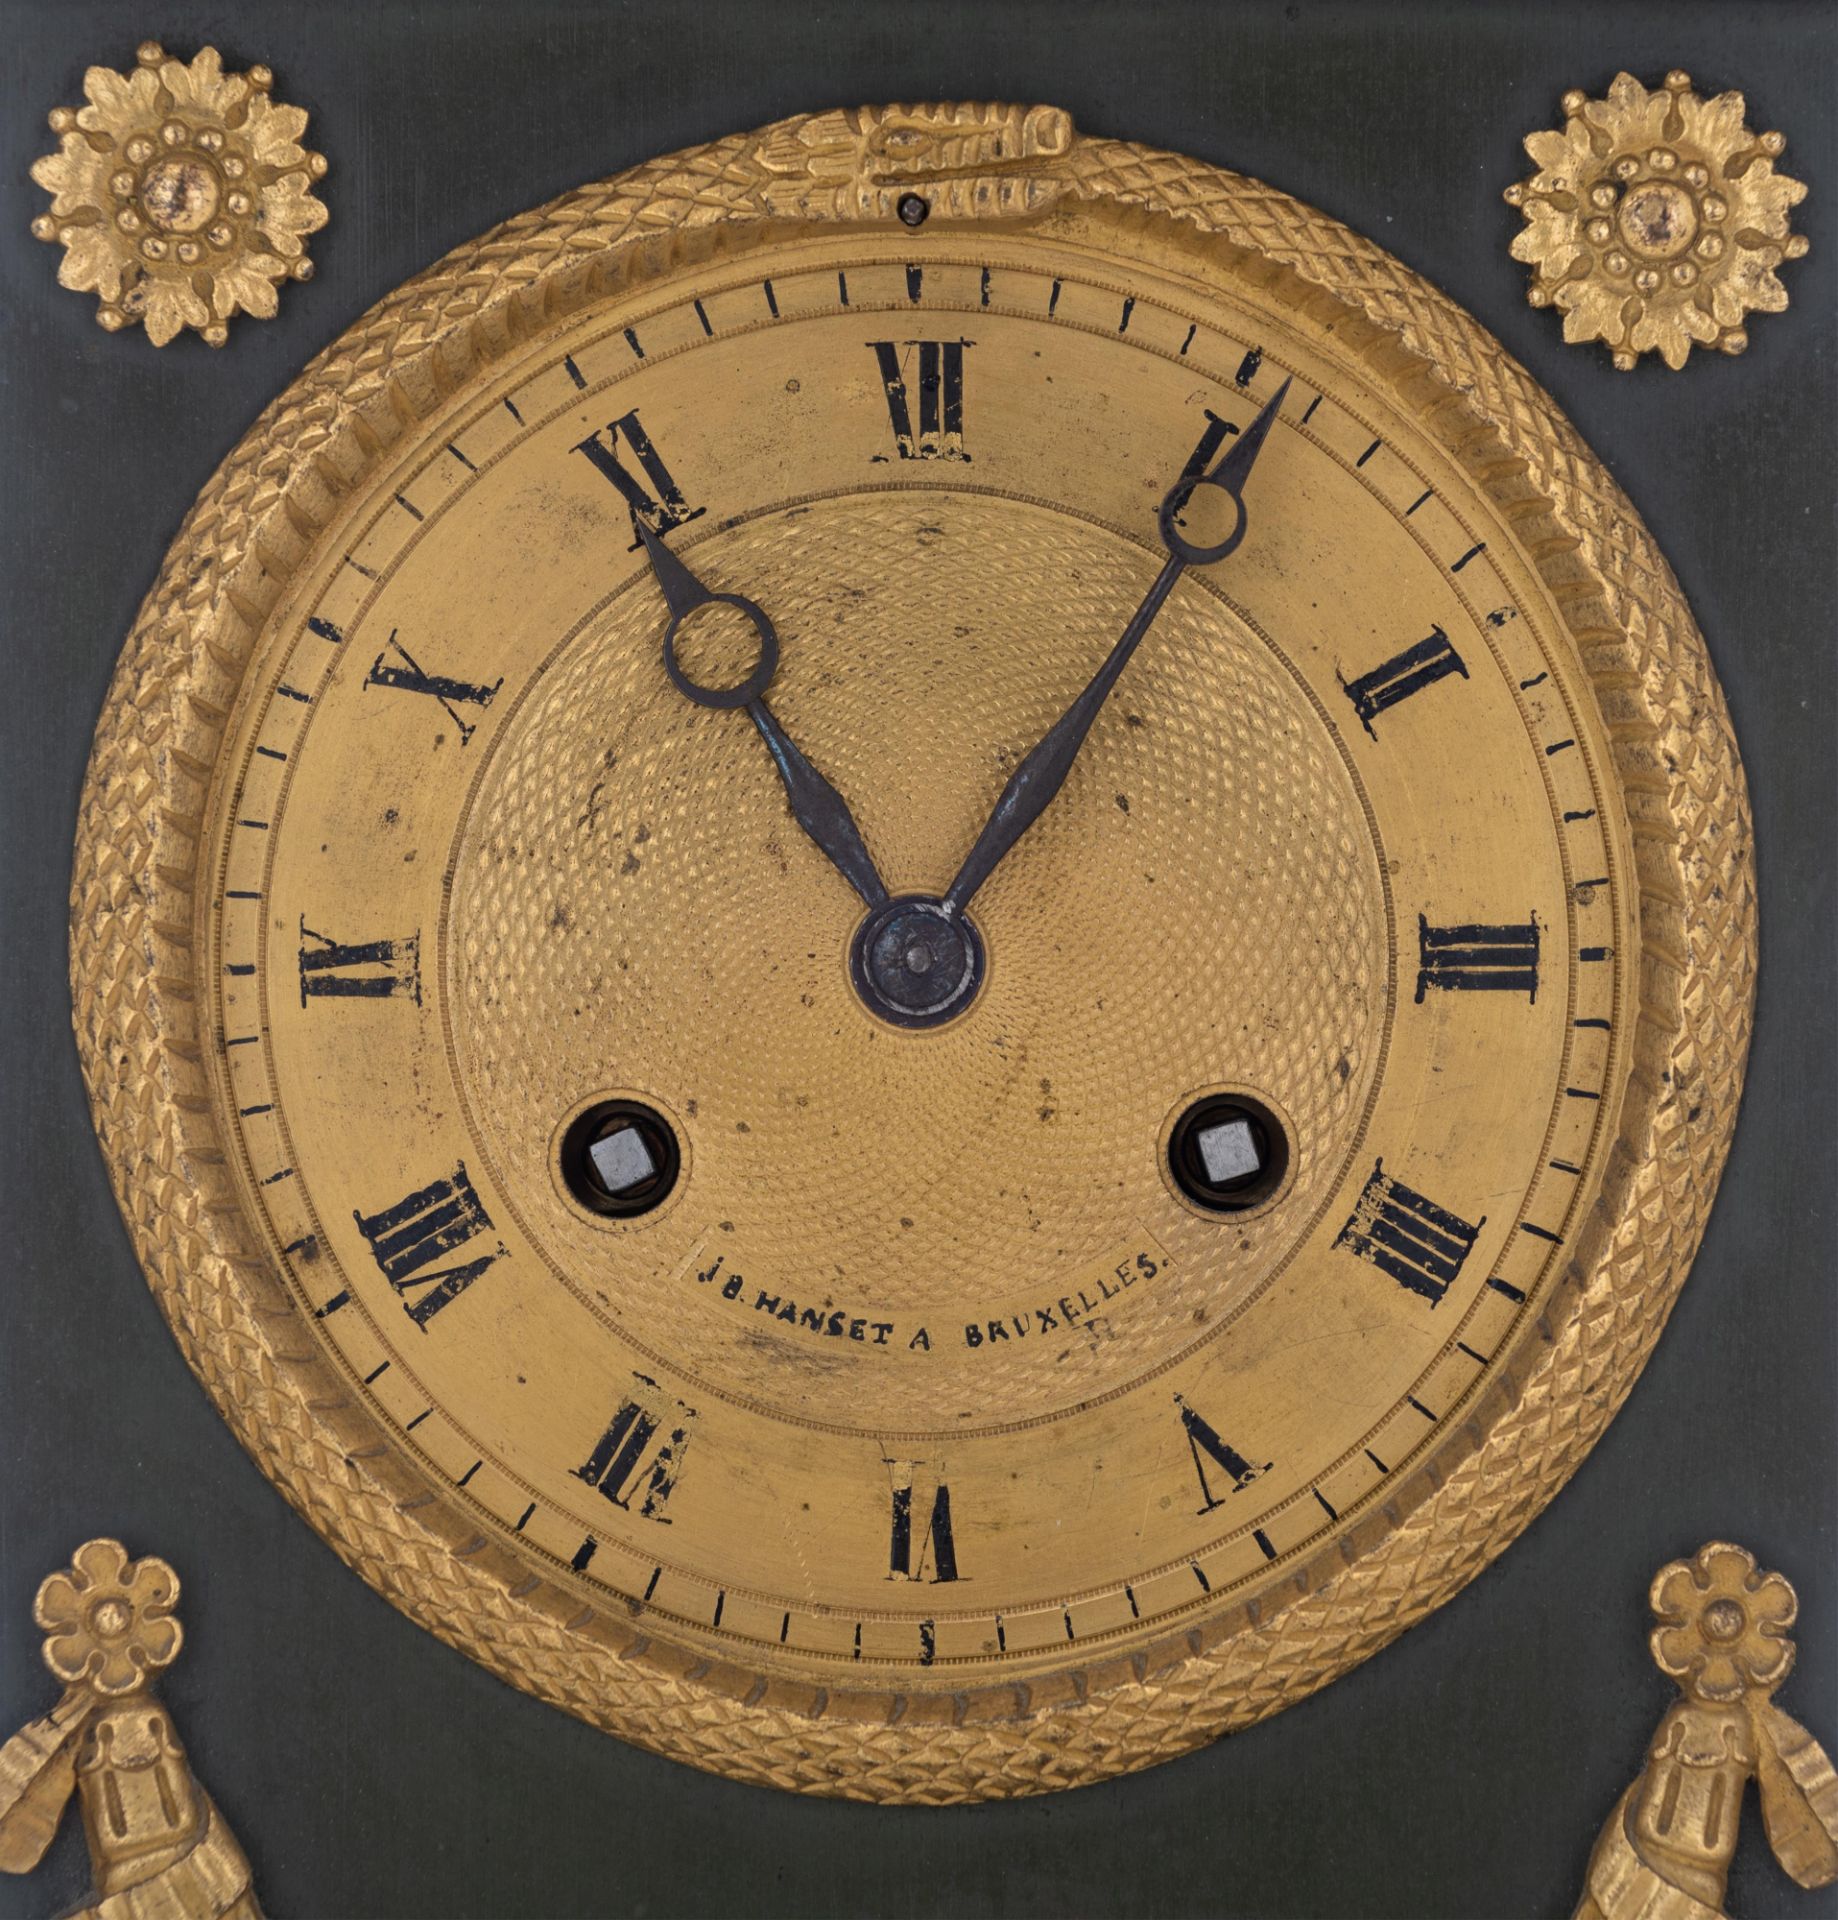 A fine Empire patinated and gilt bronze table clock, 'J.B. Hanset, Bruxelles', H 38 cm - Image 6 of 11